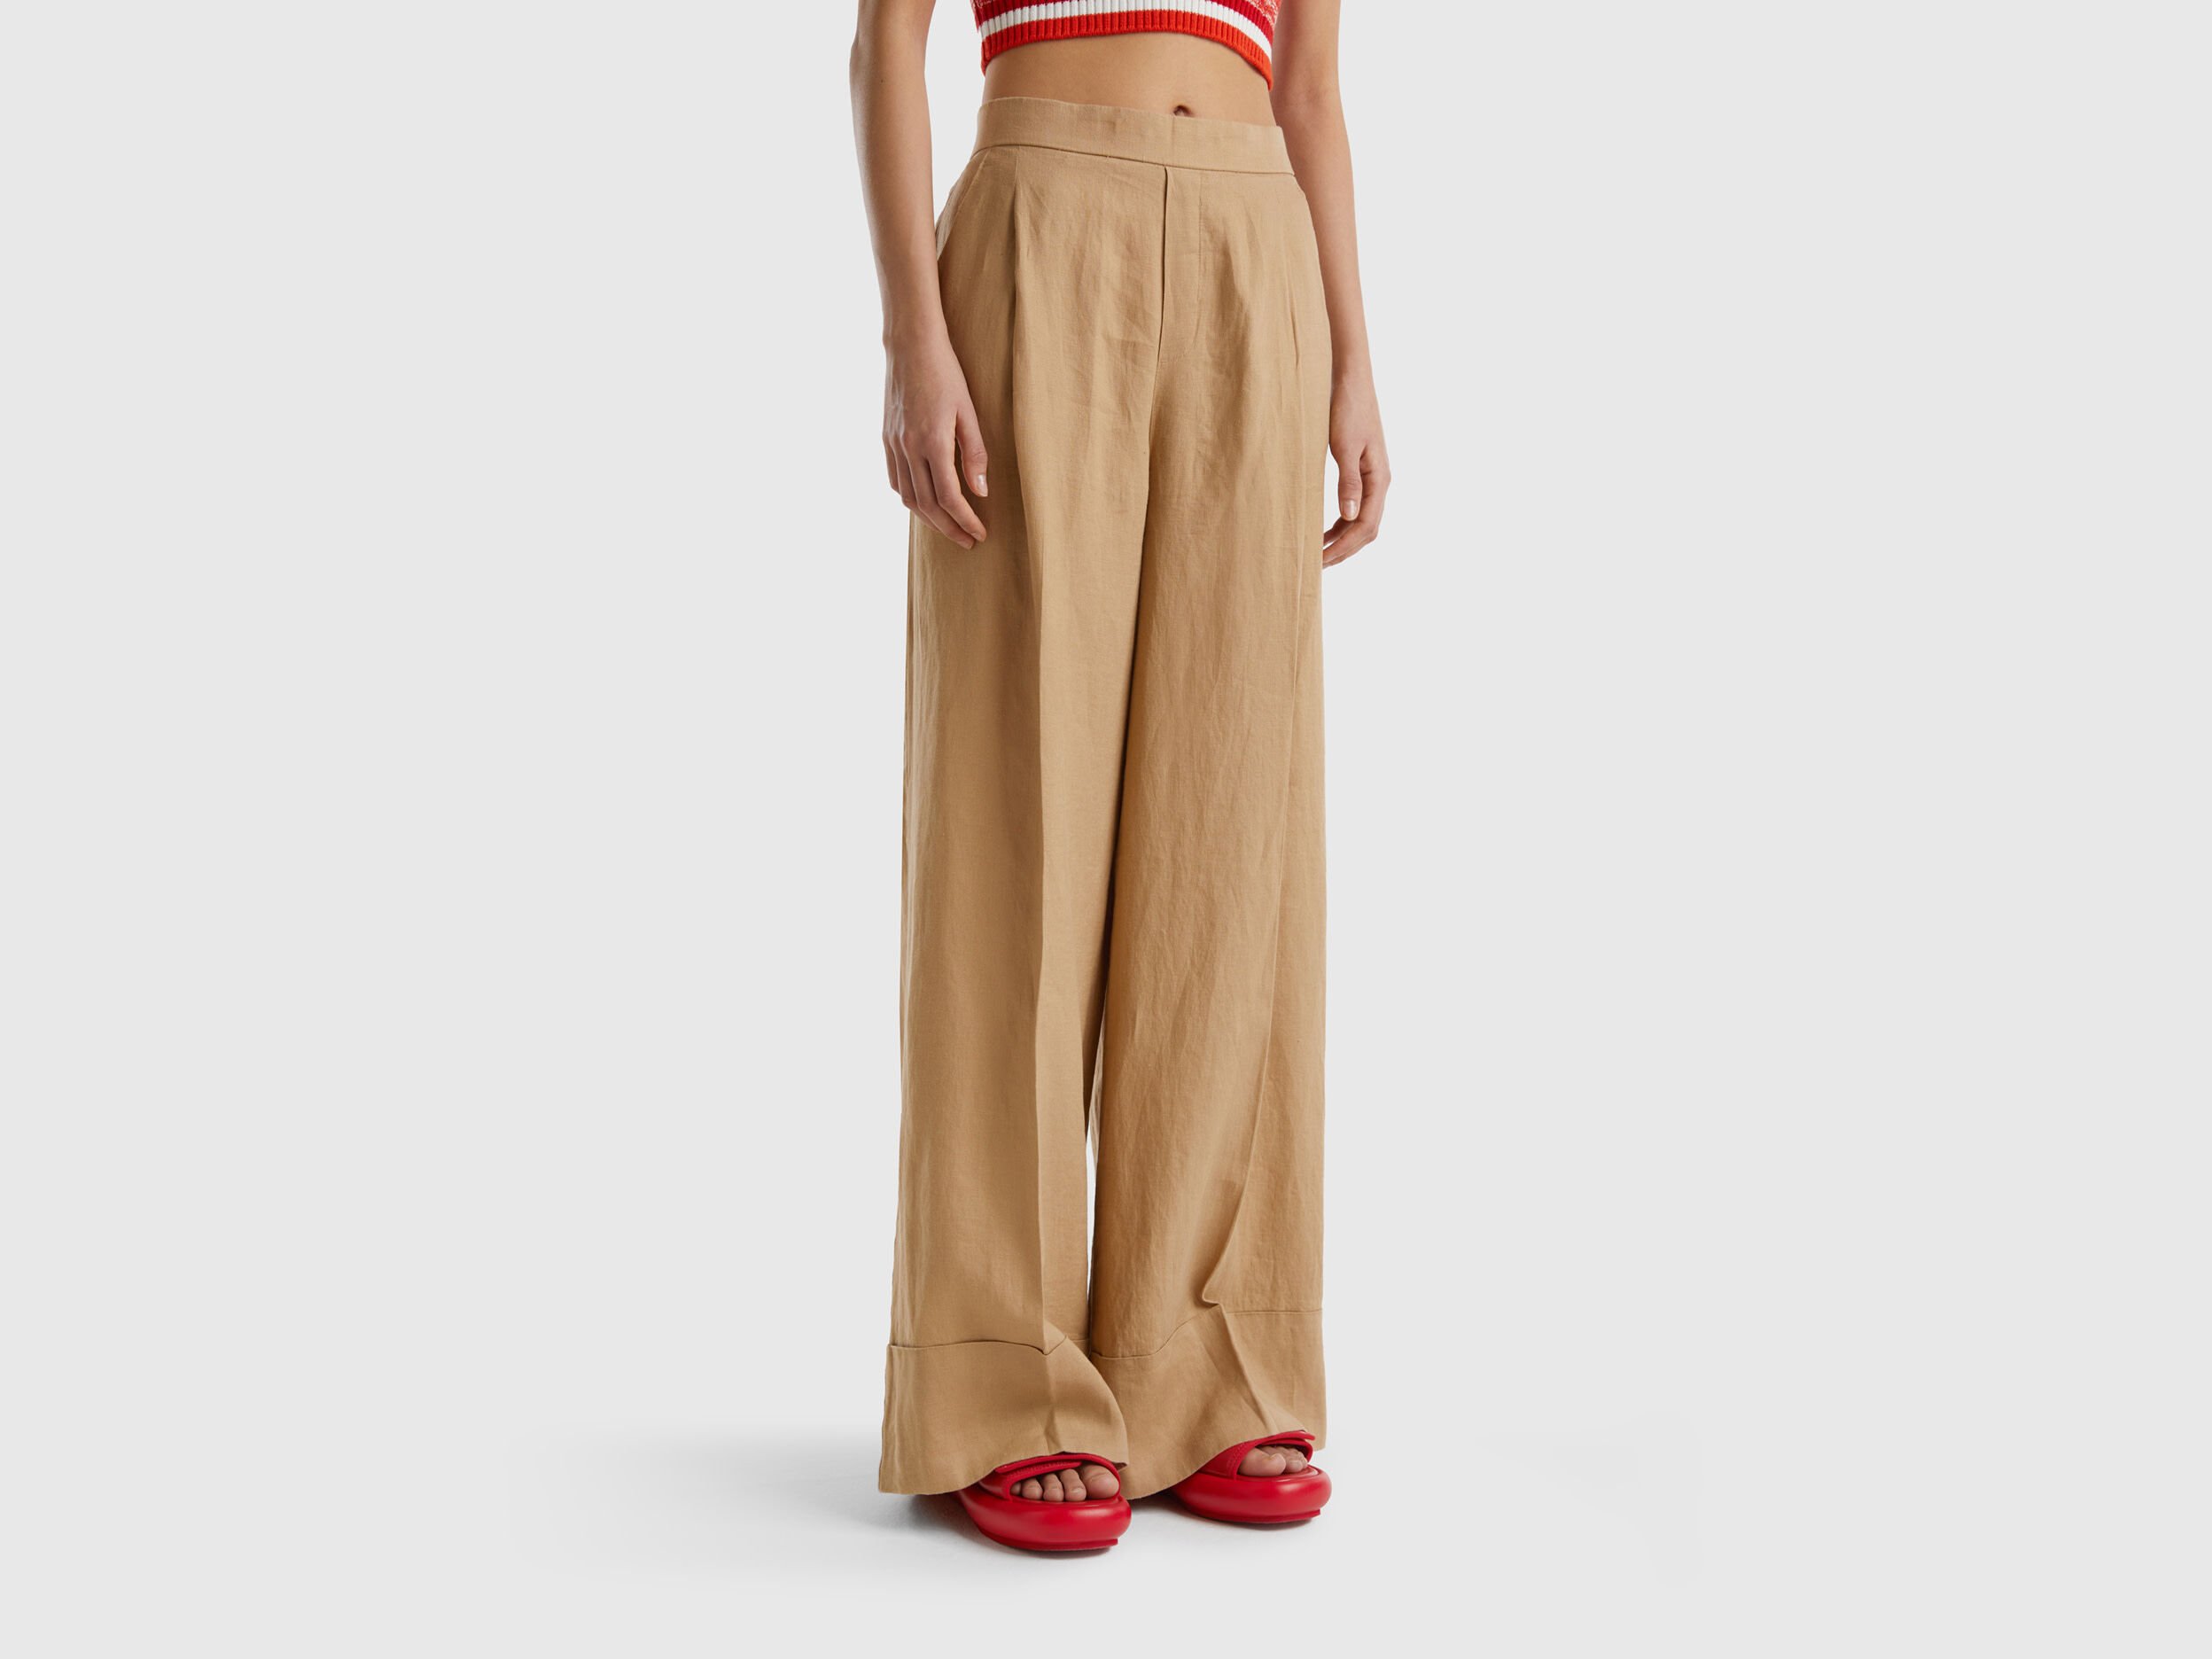 United Colors Of Benetton Cropped Length Linen Trouser 580876html  Buy  United Colors Of Benetton Cropped Length Linen Trouser 580876html online  in India